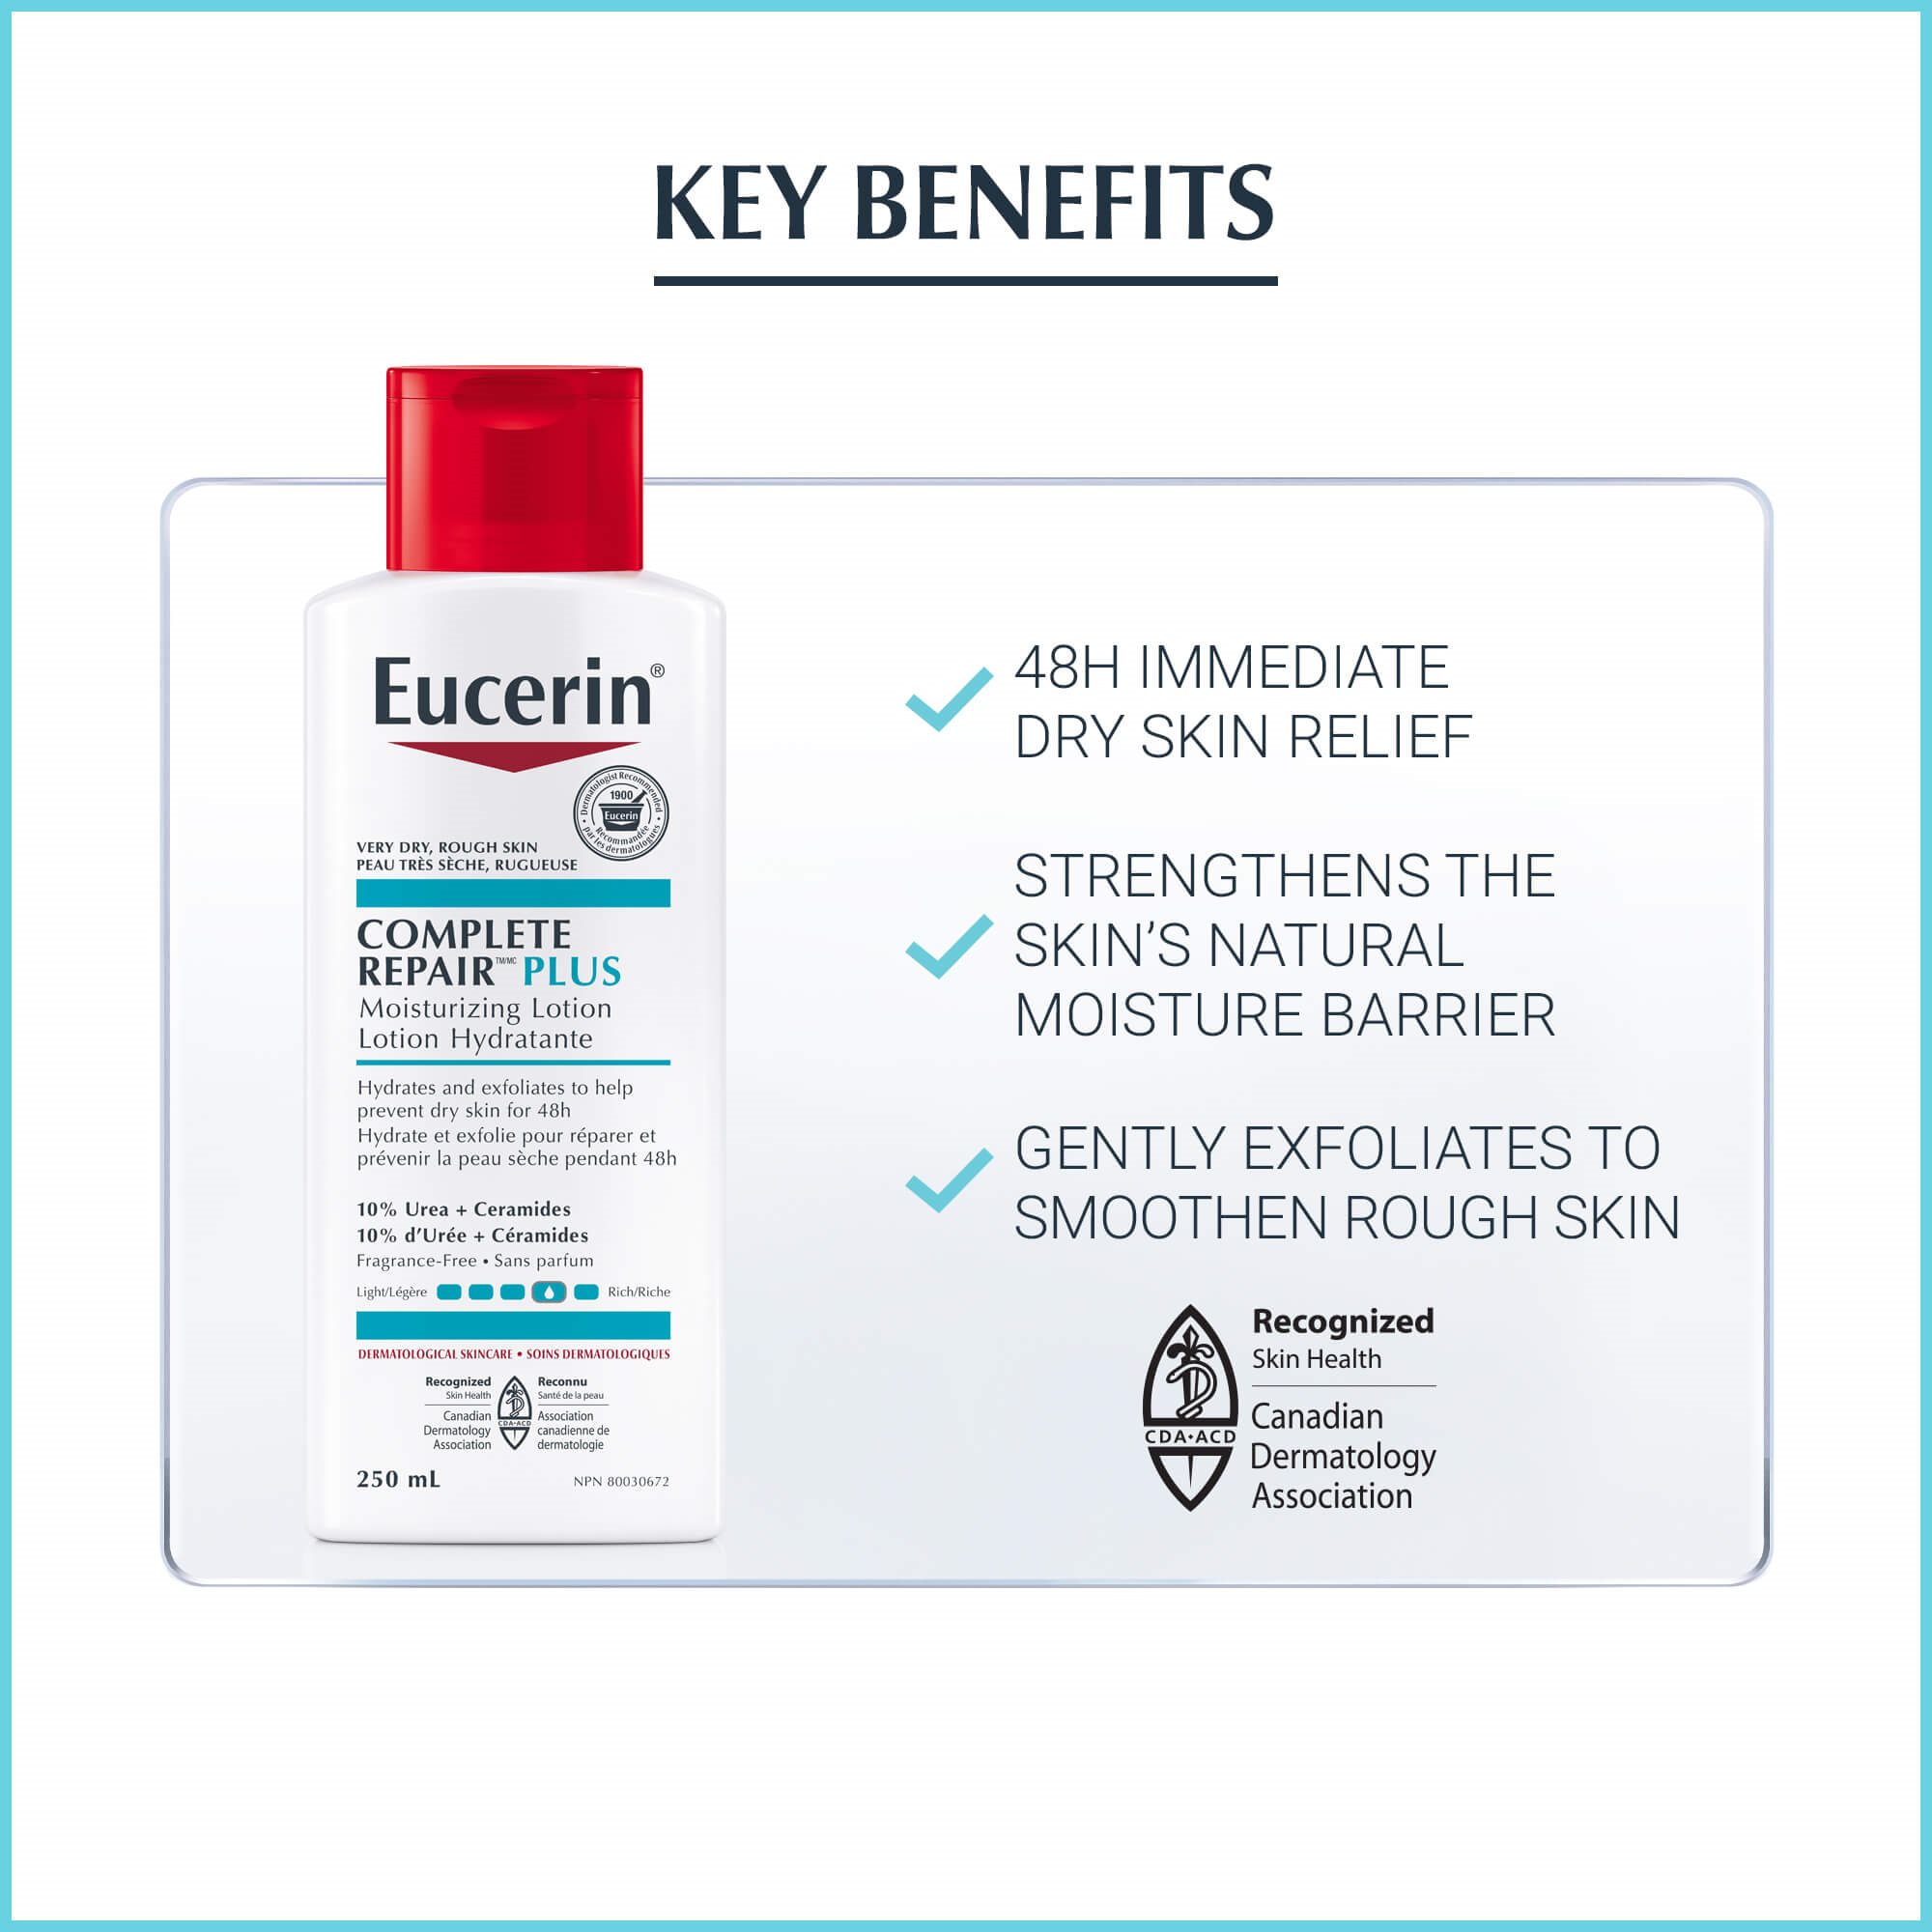 Image listing the key benefits of using Eucerin Complete Repair Lotion Plus.